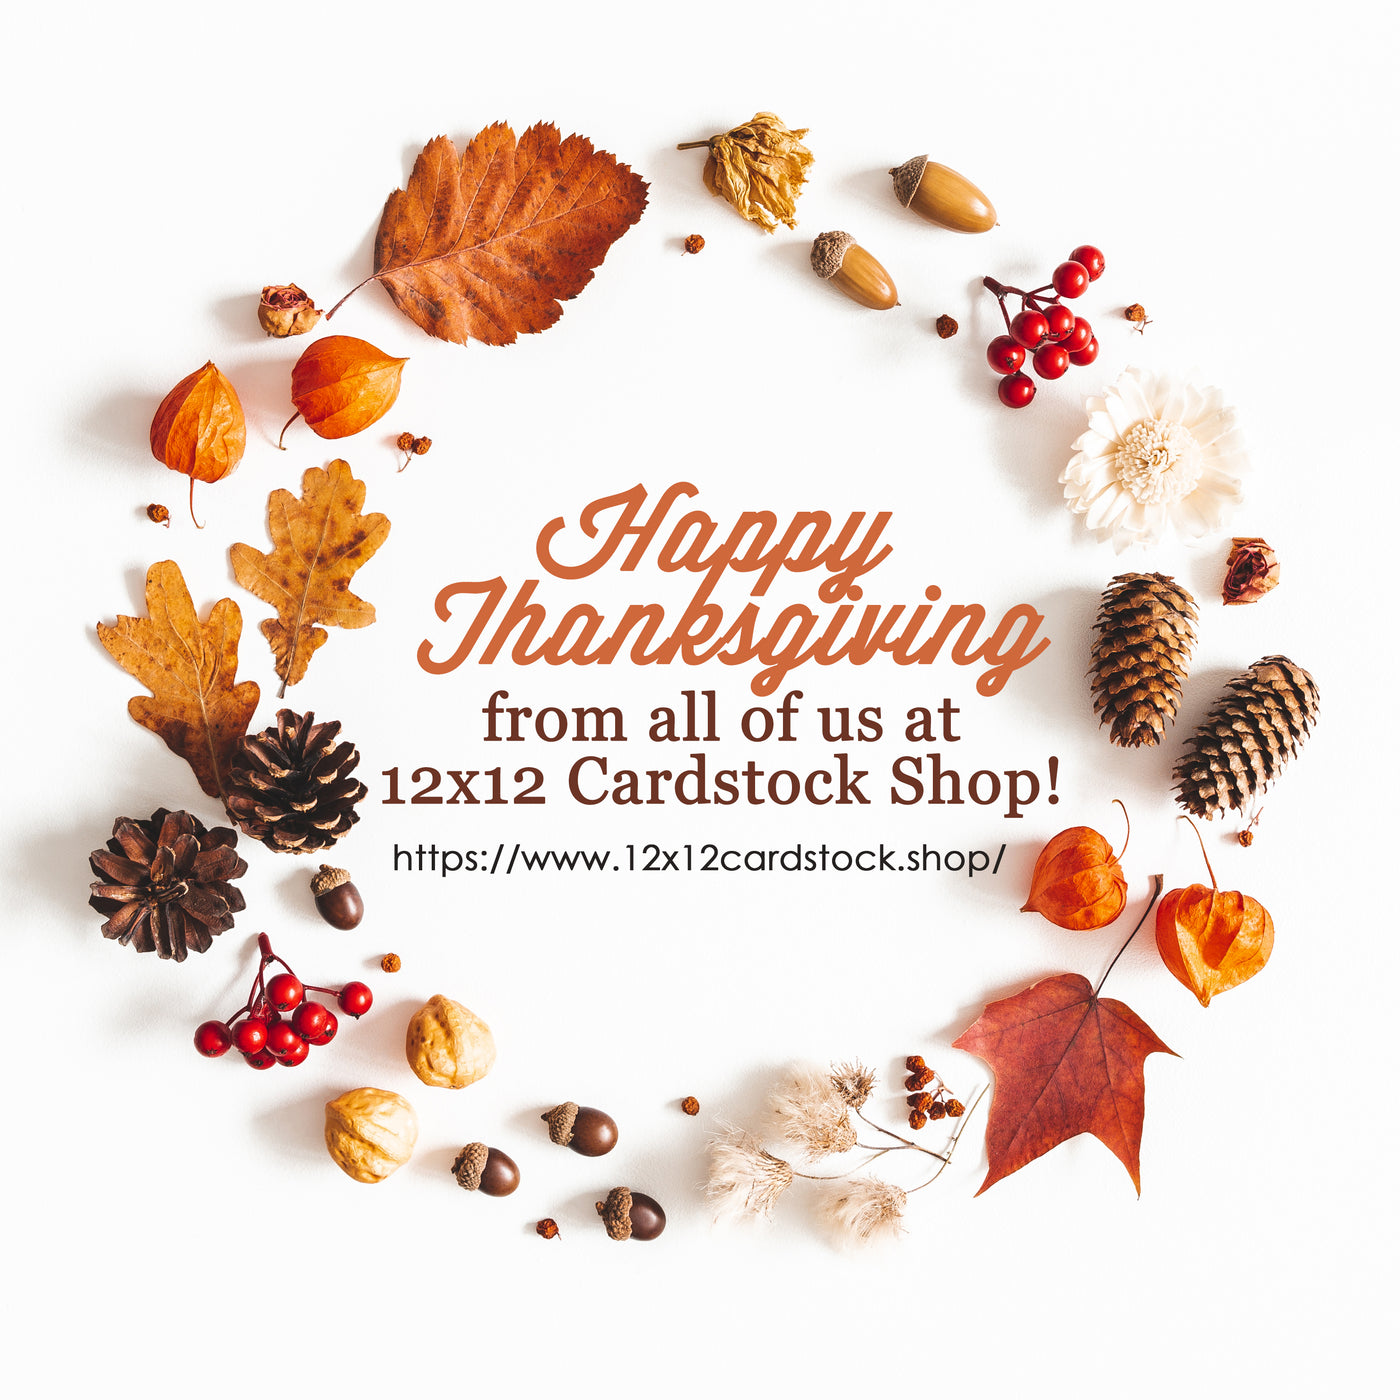 Happy Thanksgiving from all of us at the 12x12 Cardstock Shop!